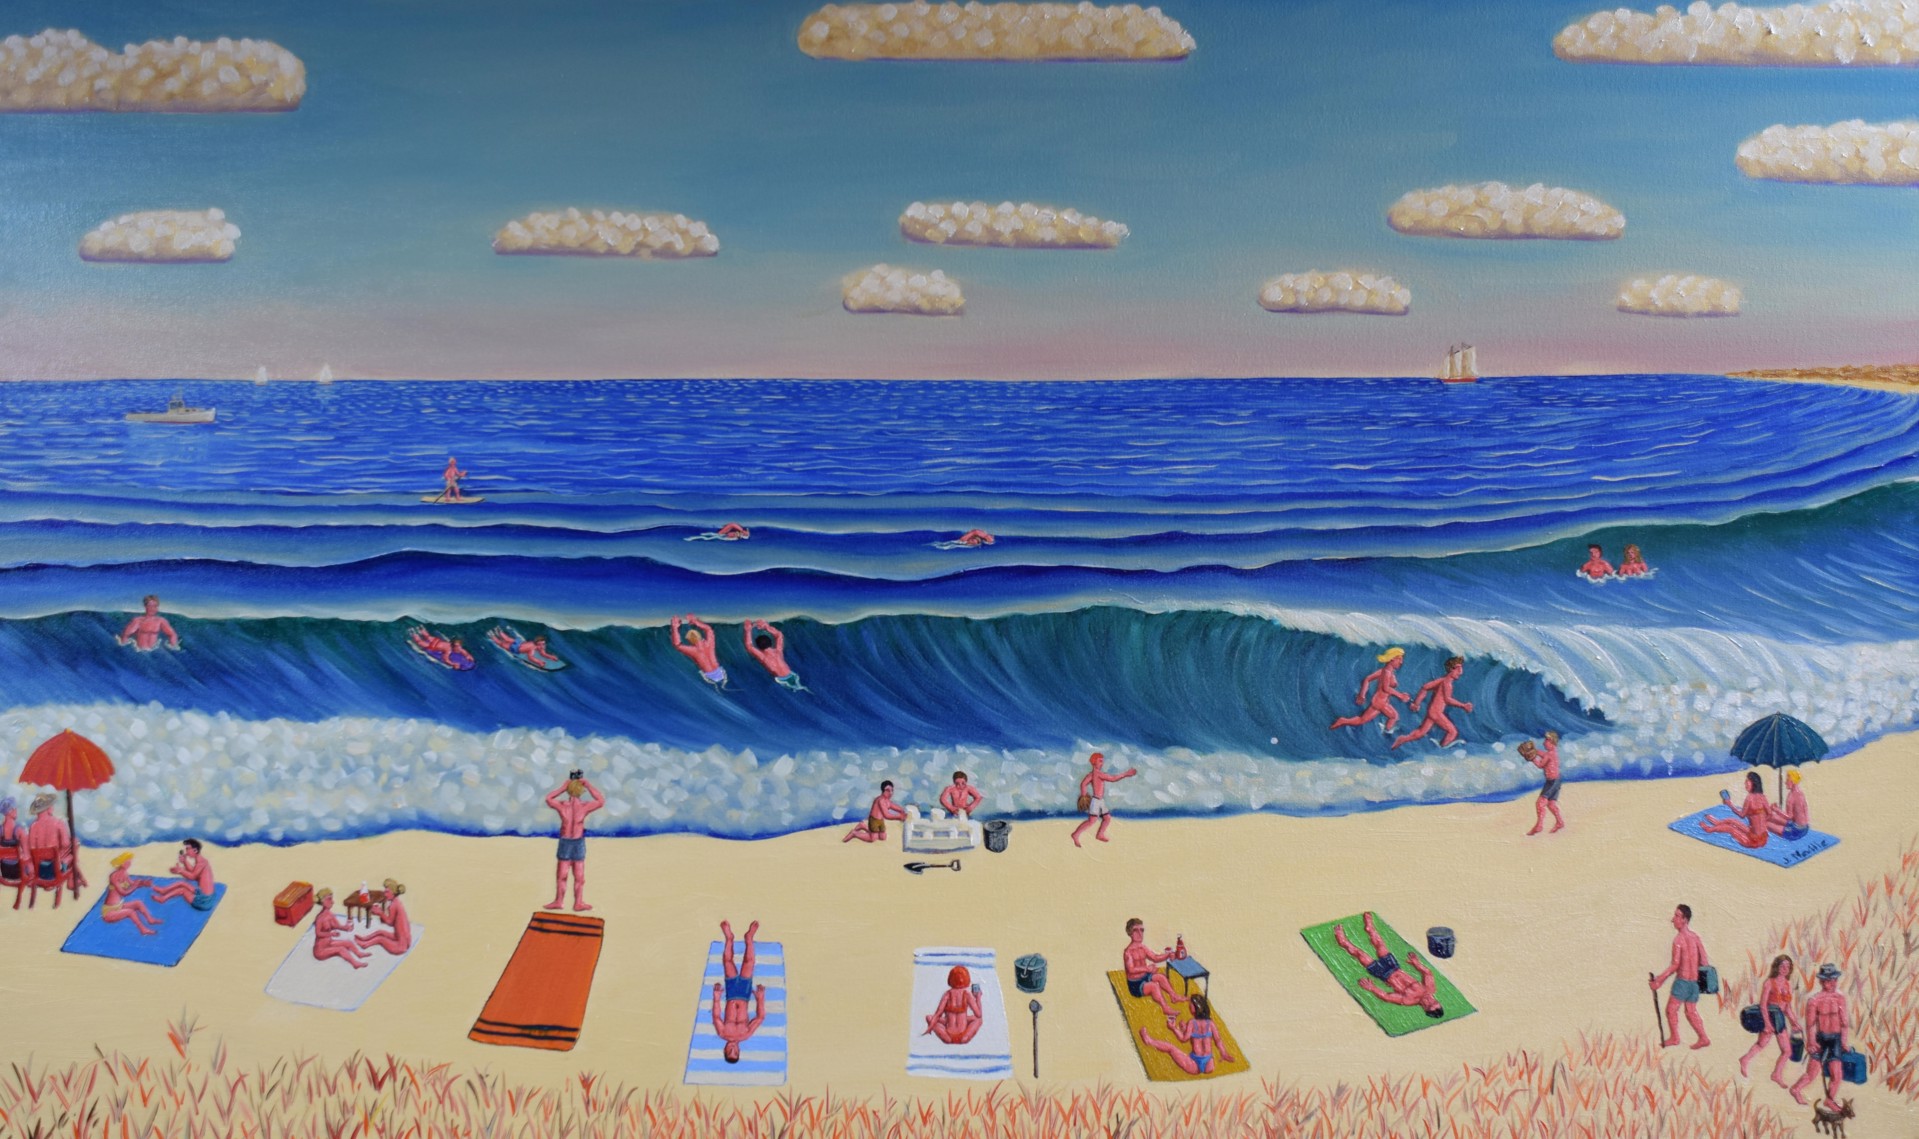 A Day at the Beach by John Neville